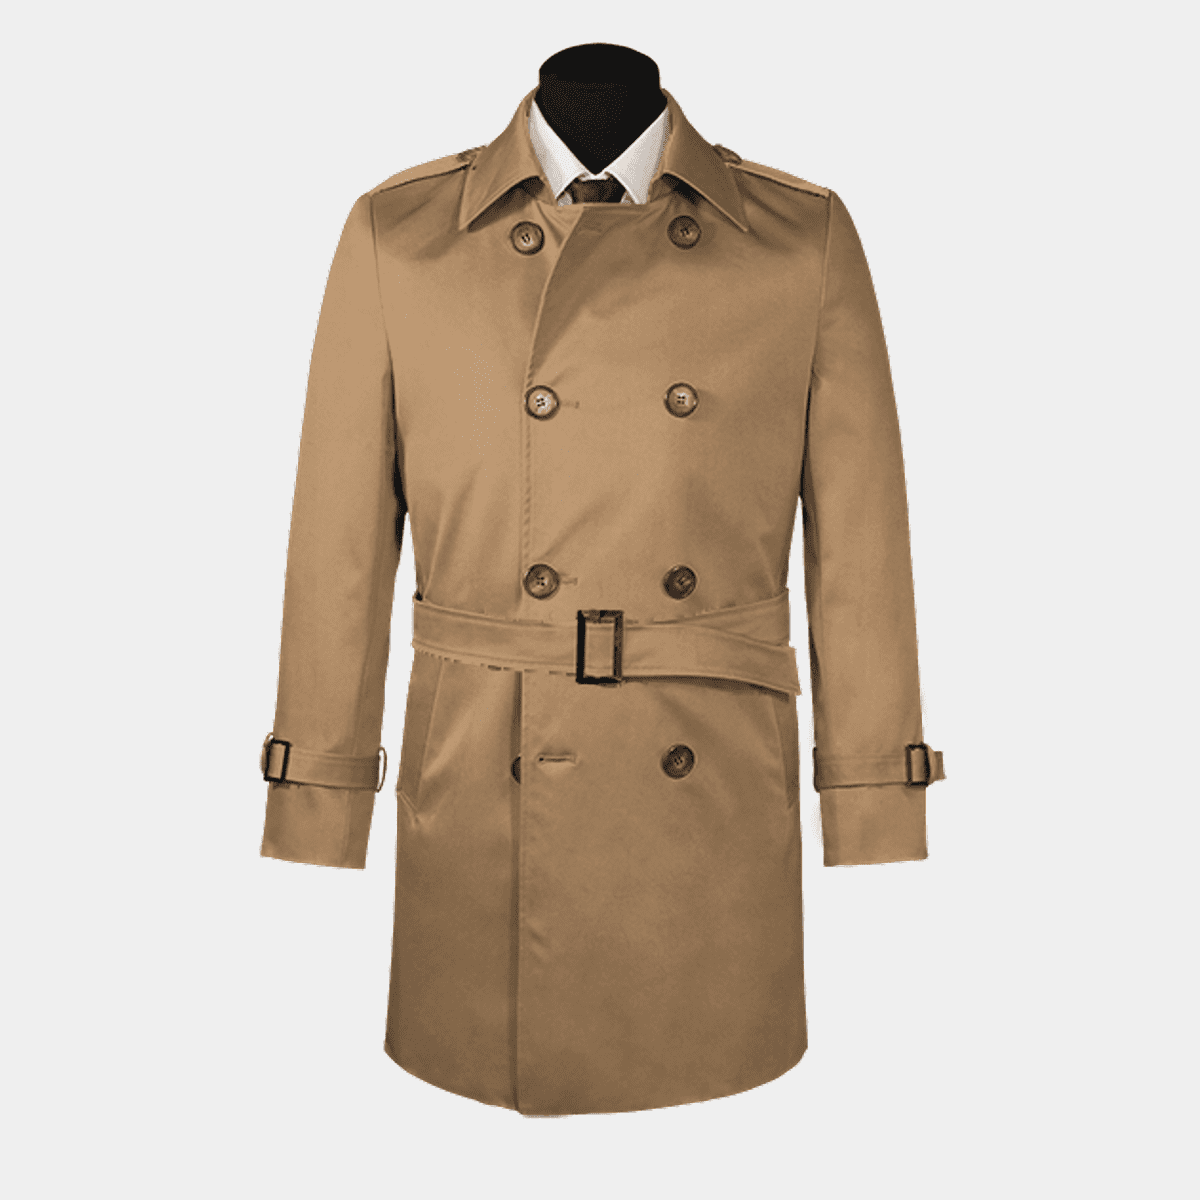 Brown belted long rain coat with epaulettes